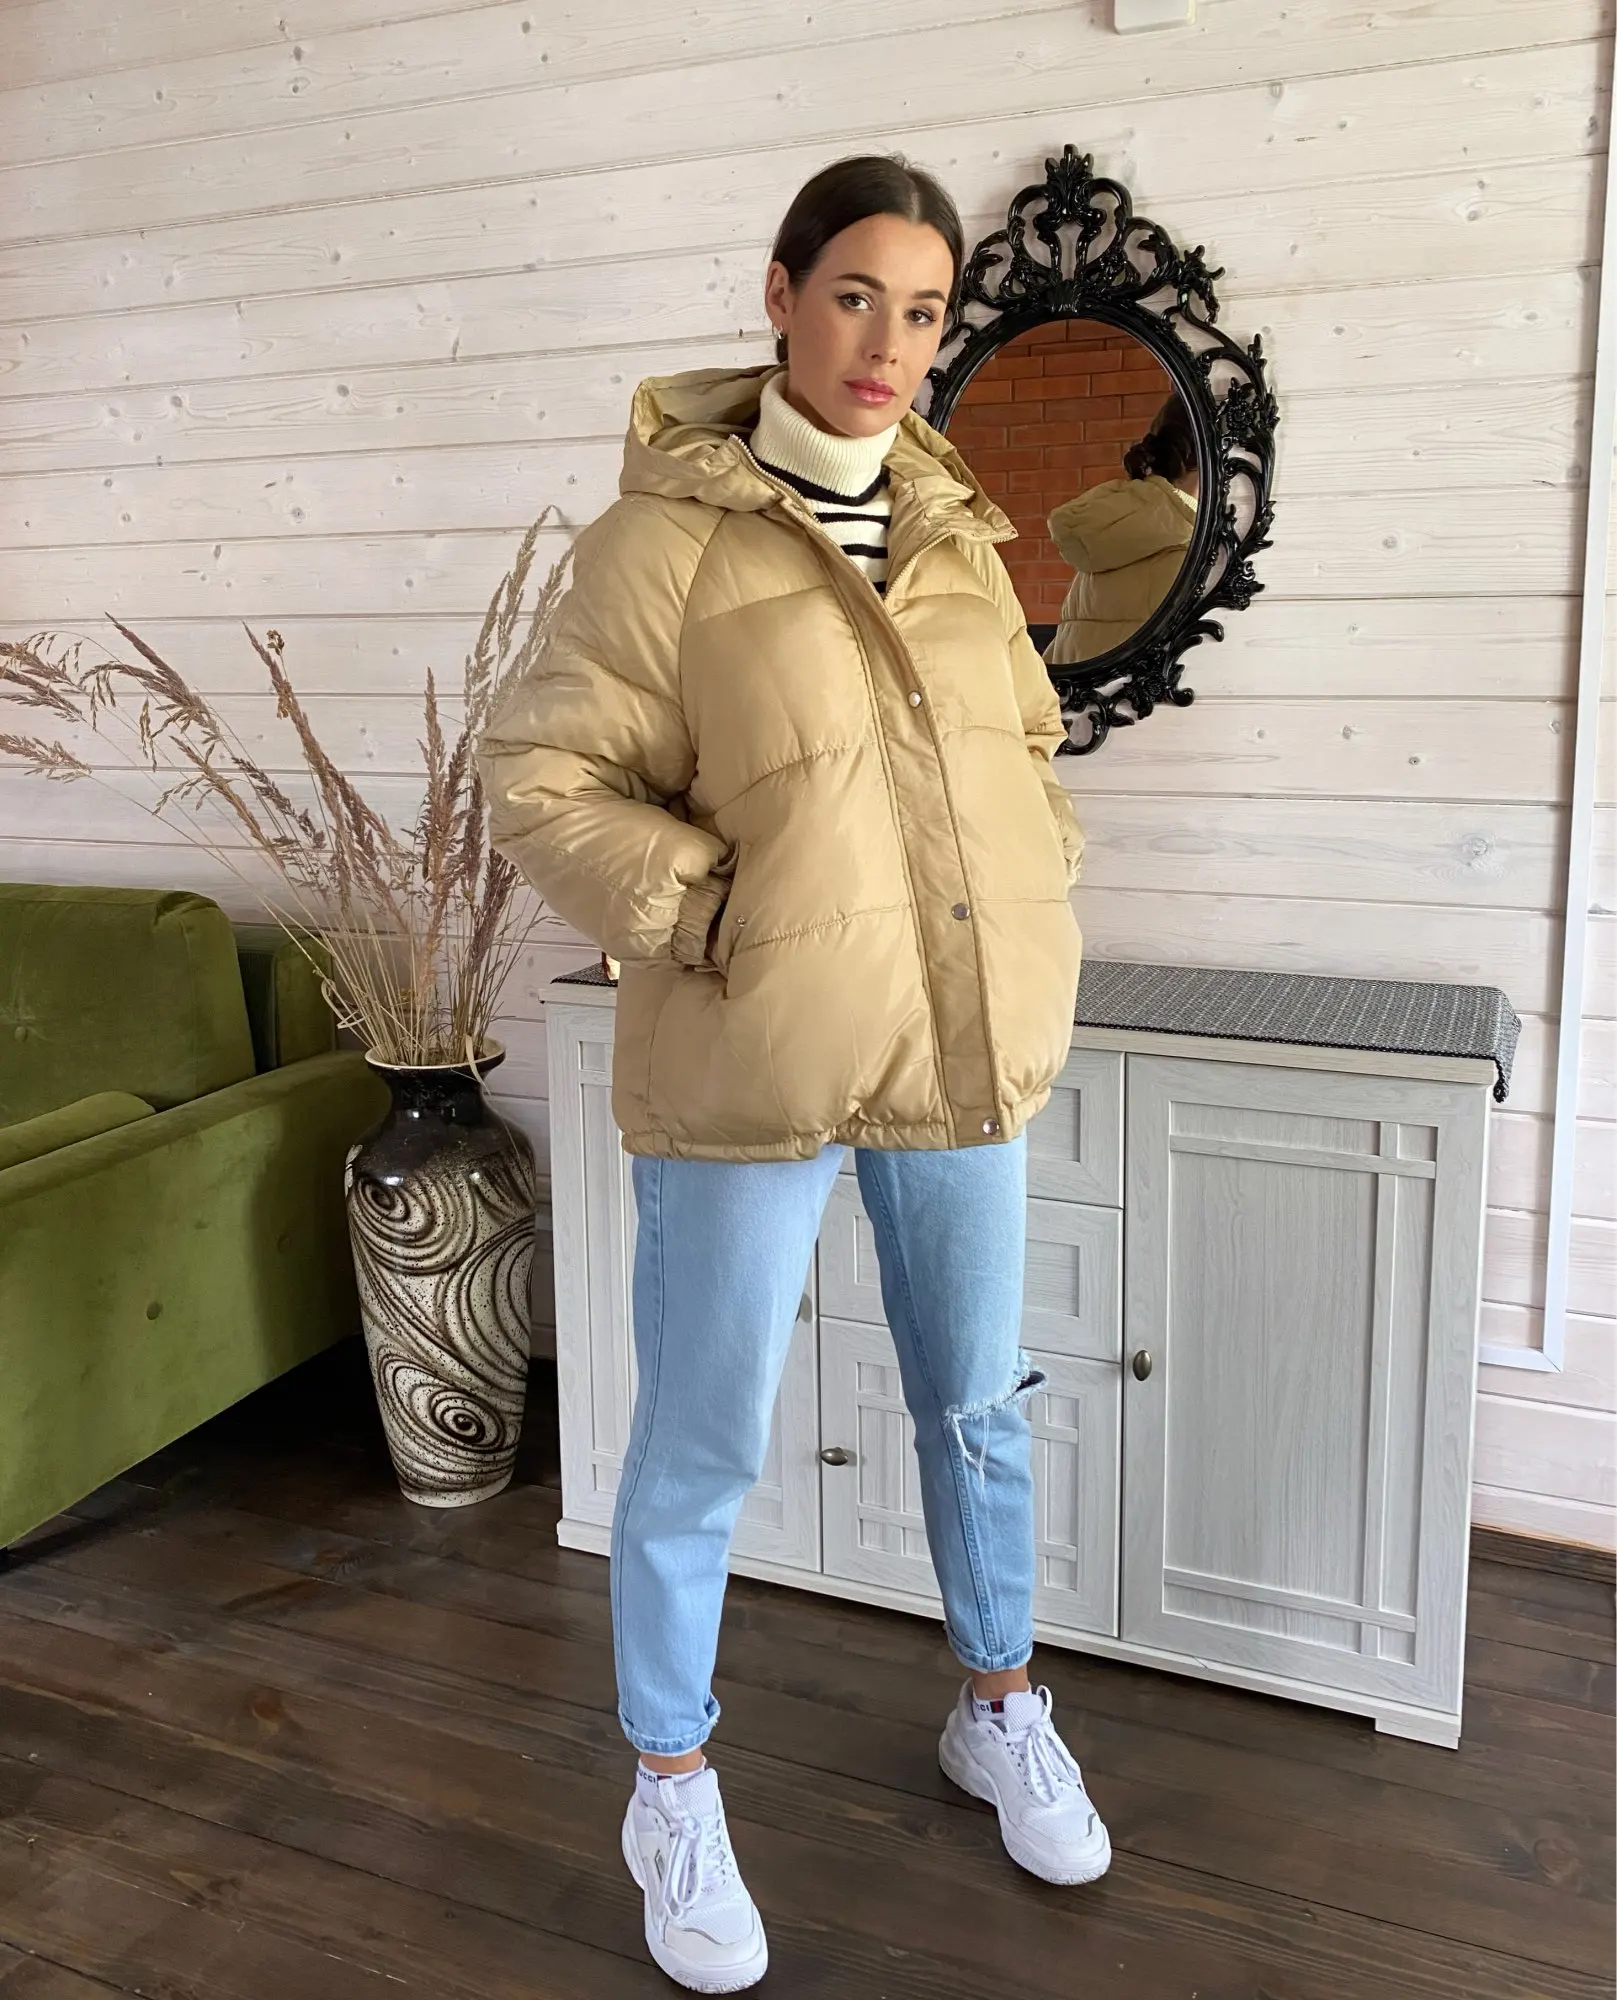 Women Short Jacket Winter Thick Hooded Cotton Padded Coats Female Korean Loose Puffer Parkas Ladies Oversize Outwear enlarge